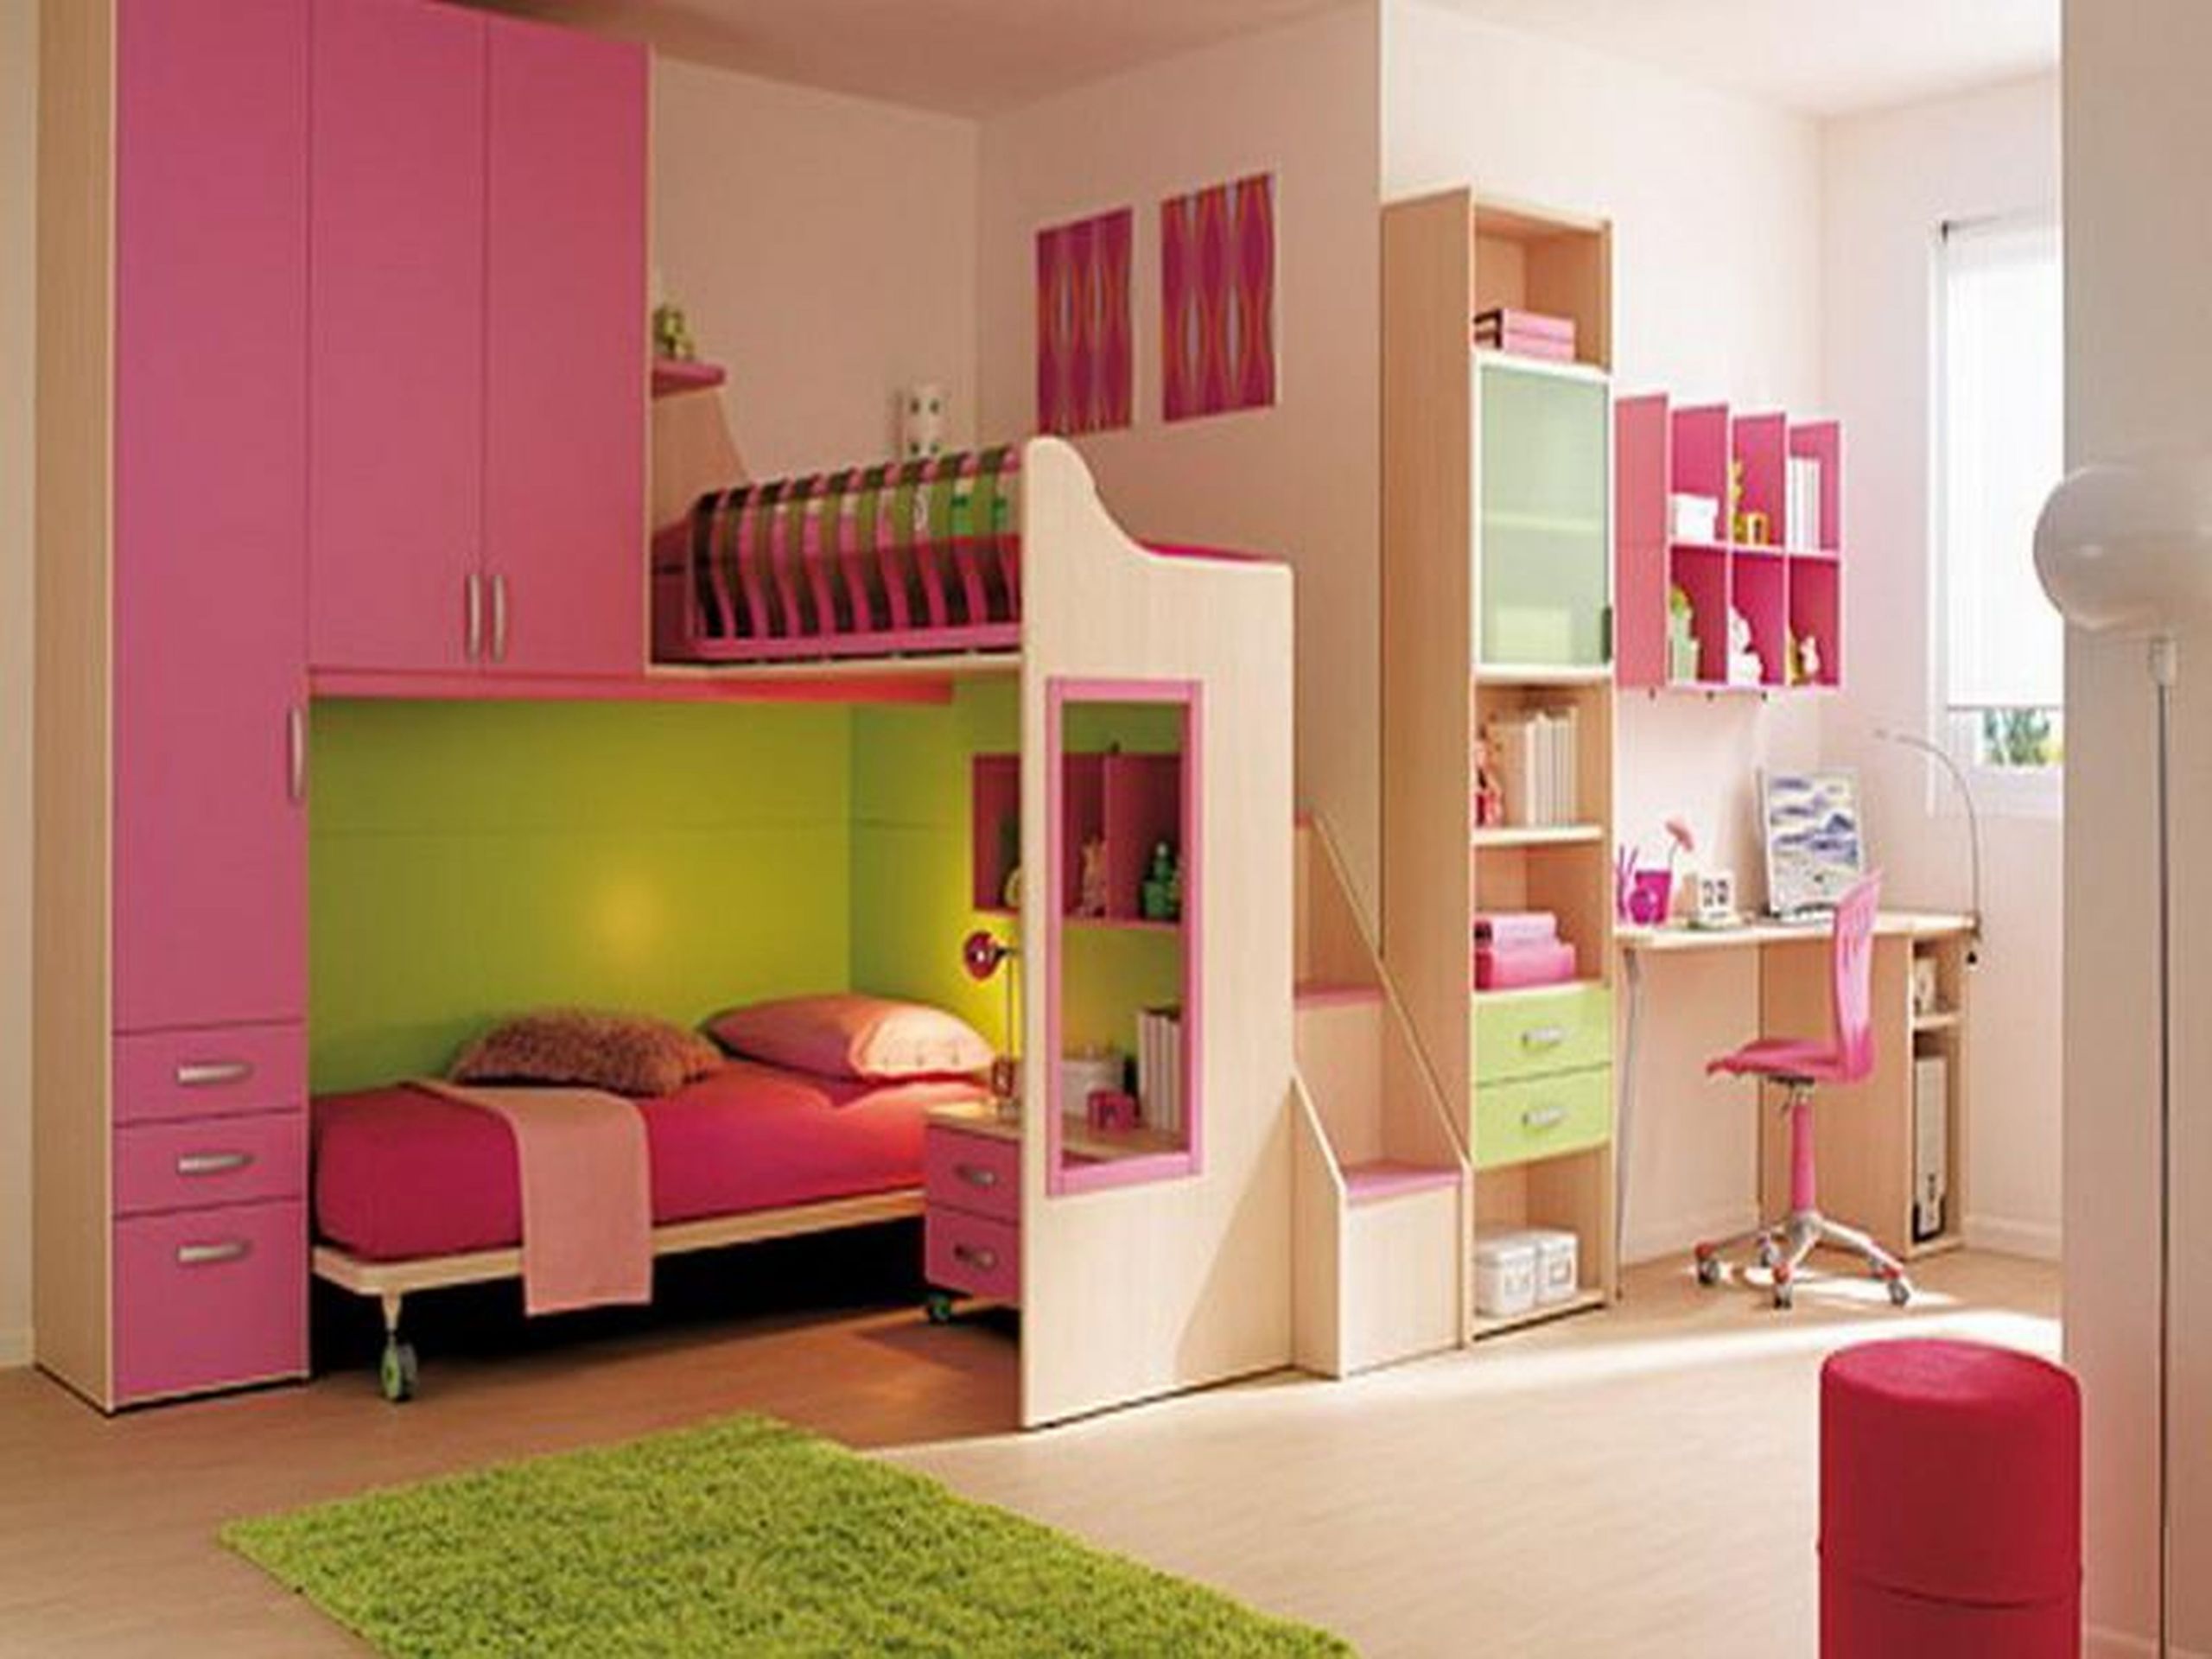 DIY Room Decorations For Kids
 DIY Storage Ideas For Kids Room Crafts To Do With Kids